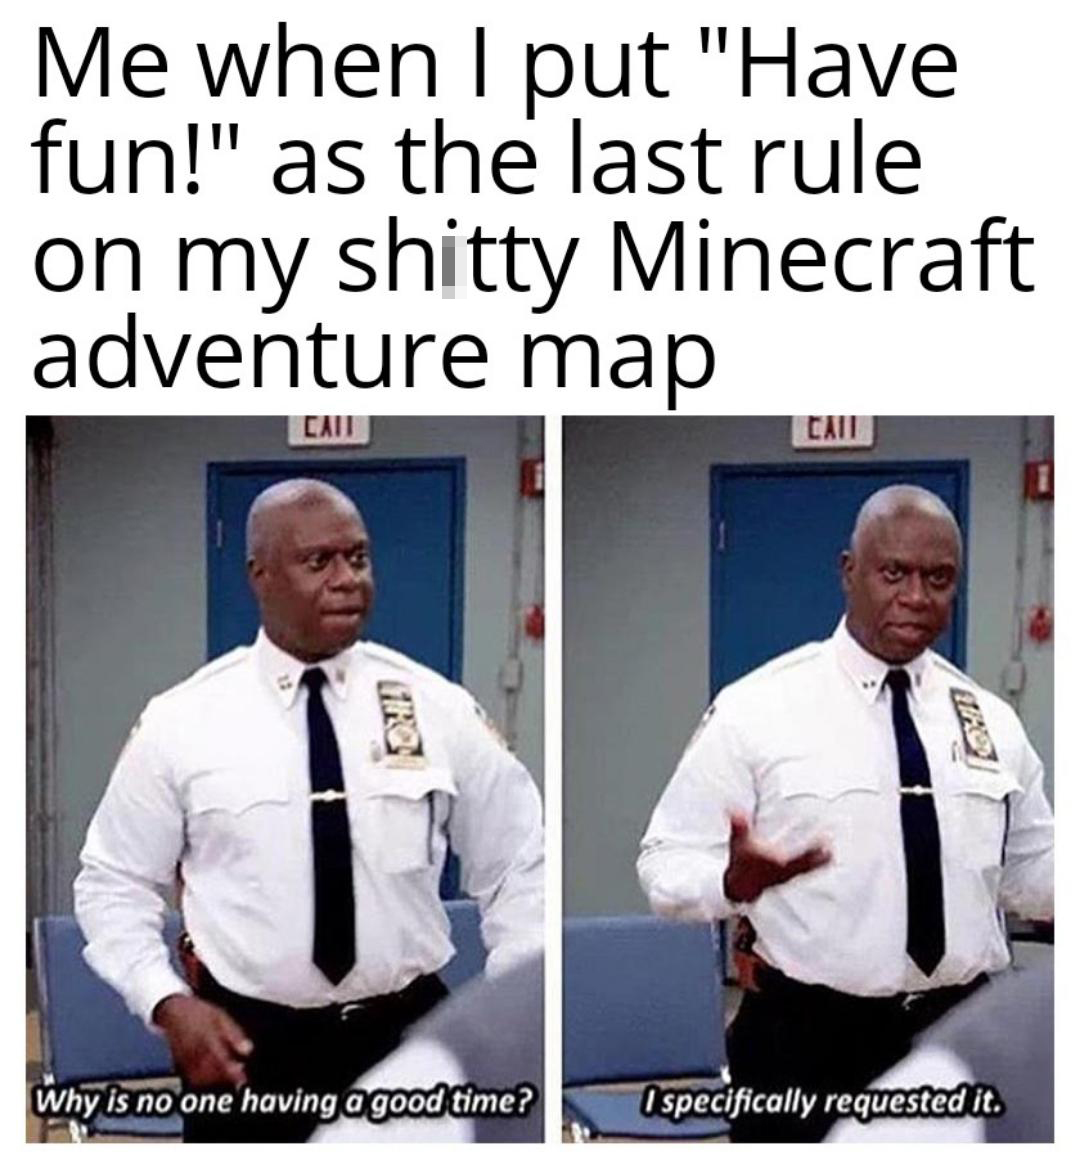 gaming memes - paramedic memes - Me when I put "Have 1 fun!" as the last rule on my shitty Minecraft adventure map Cau Call Why is no one having a good time? I specifically requested it.